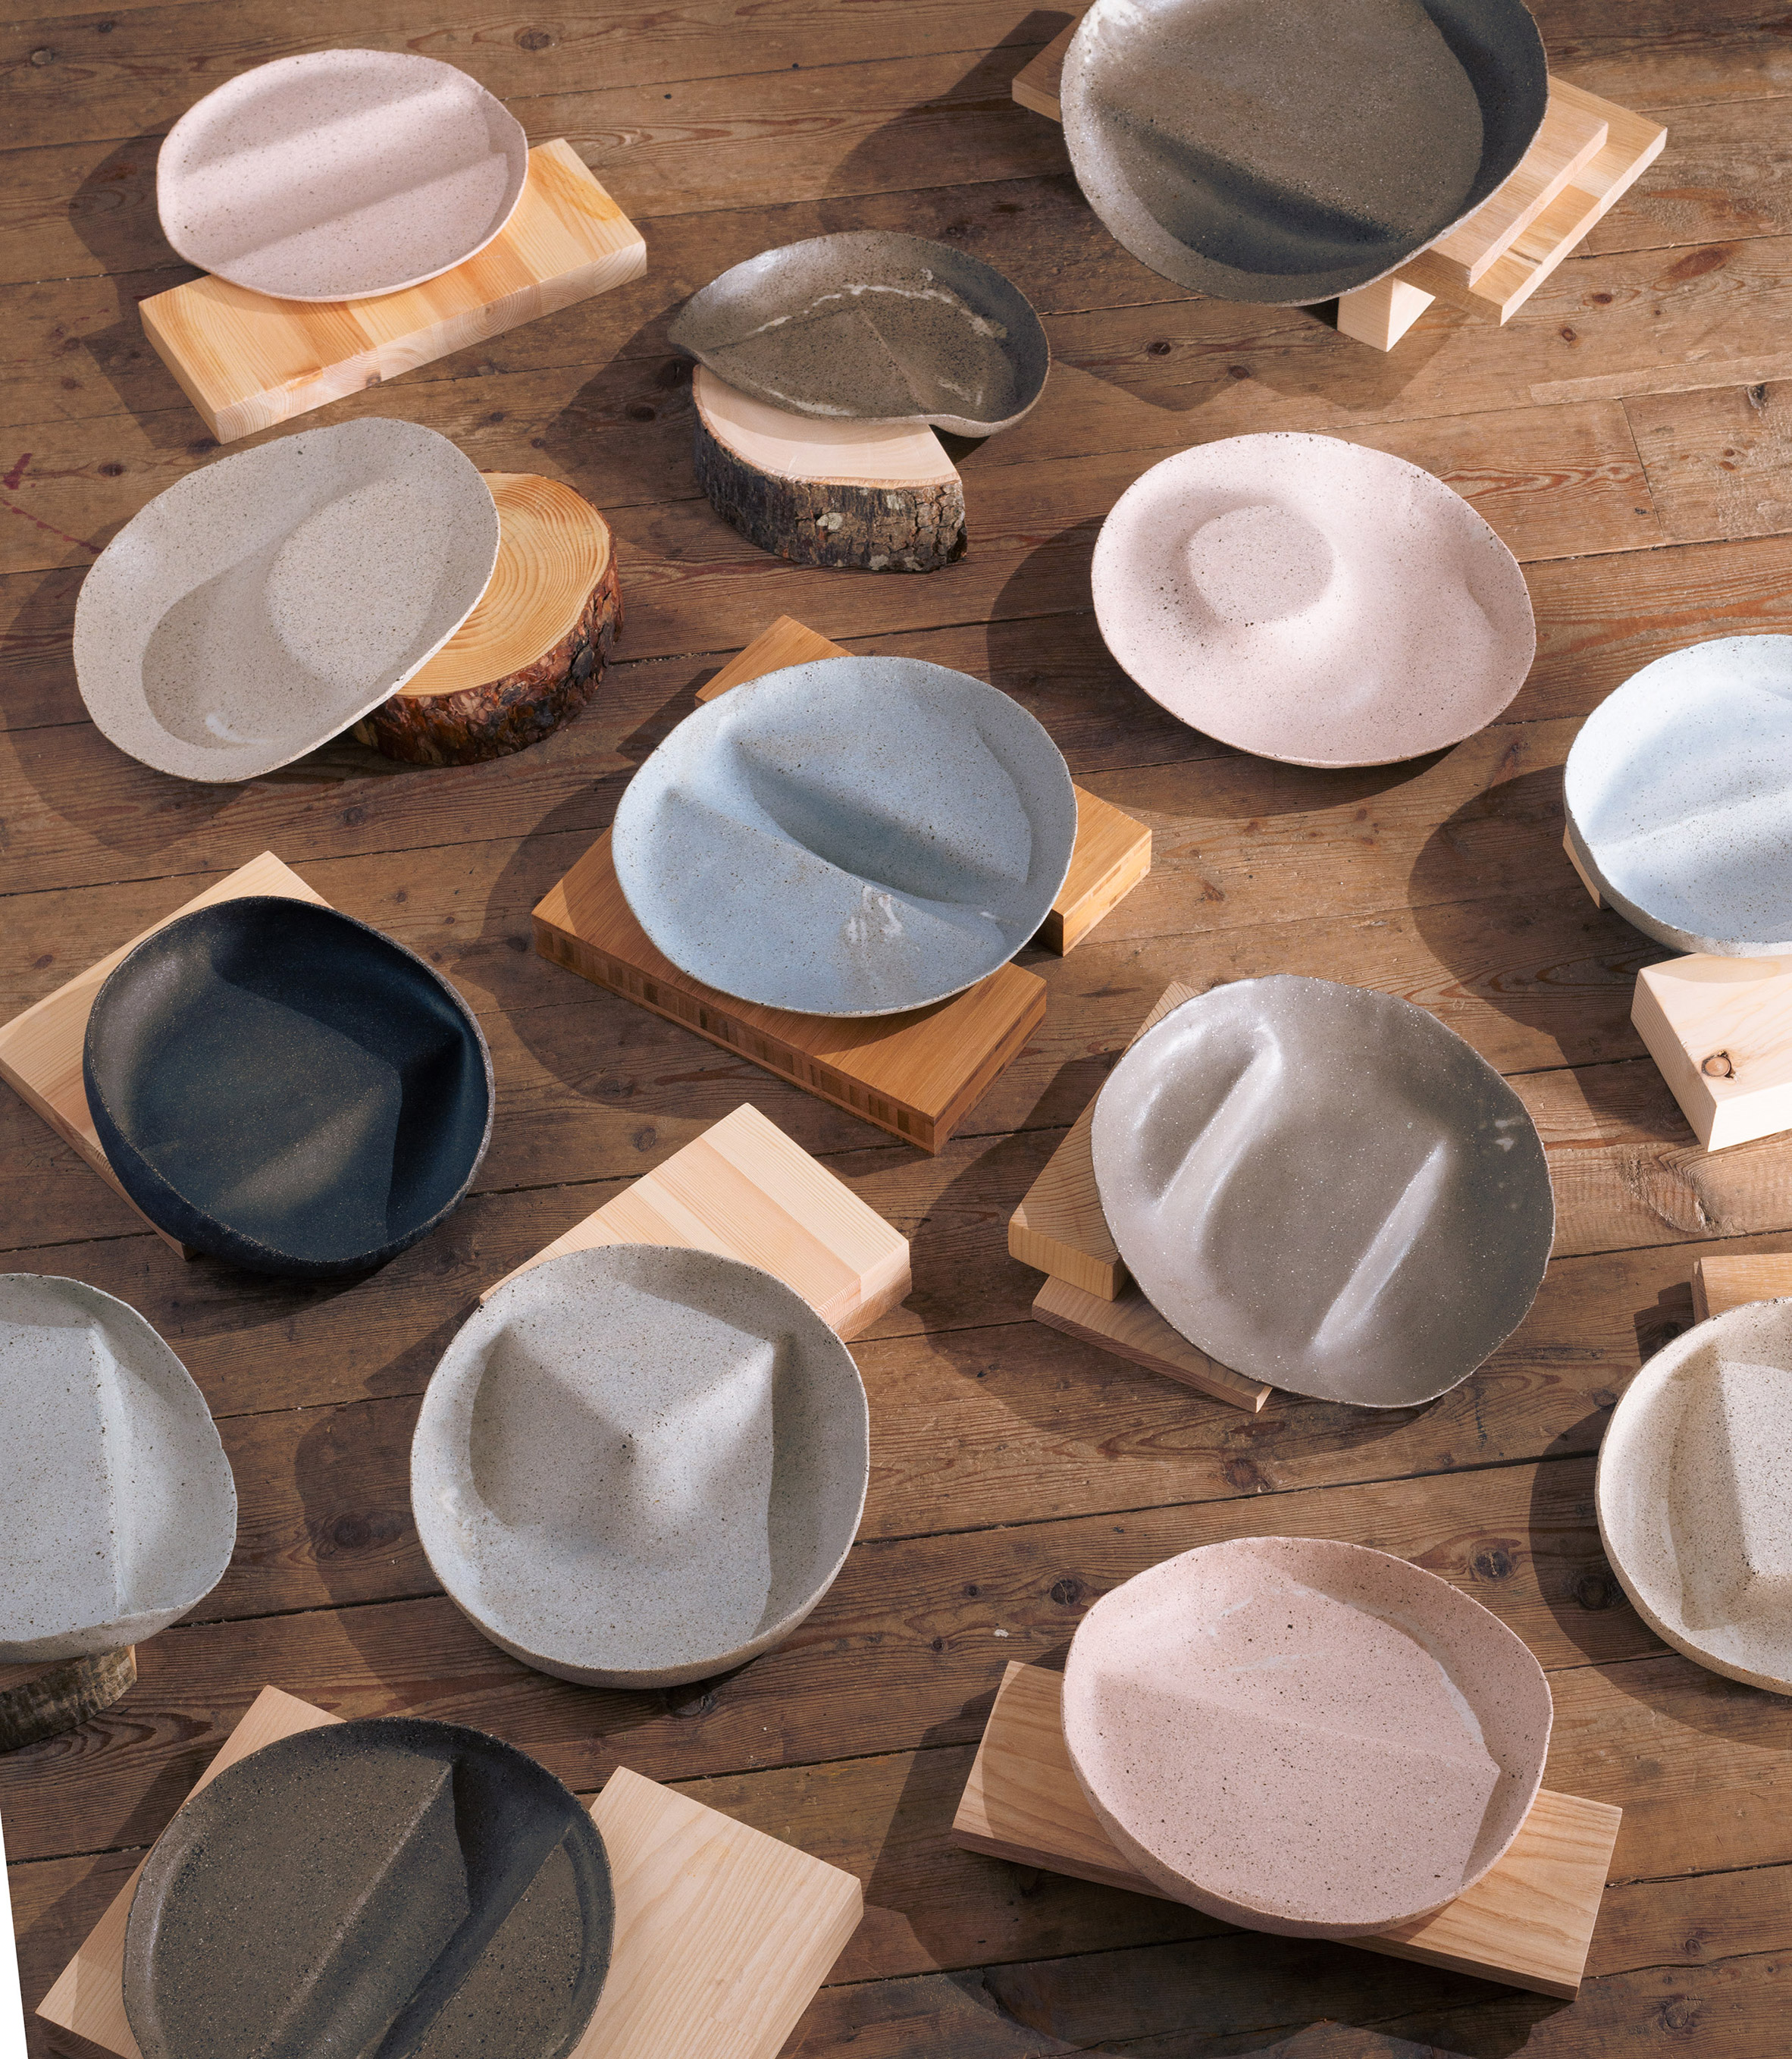 Non-traditional tableware created for Experimental Gastronomy dinner